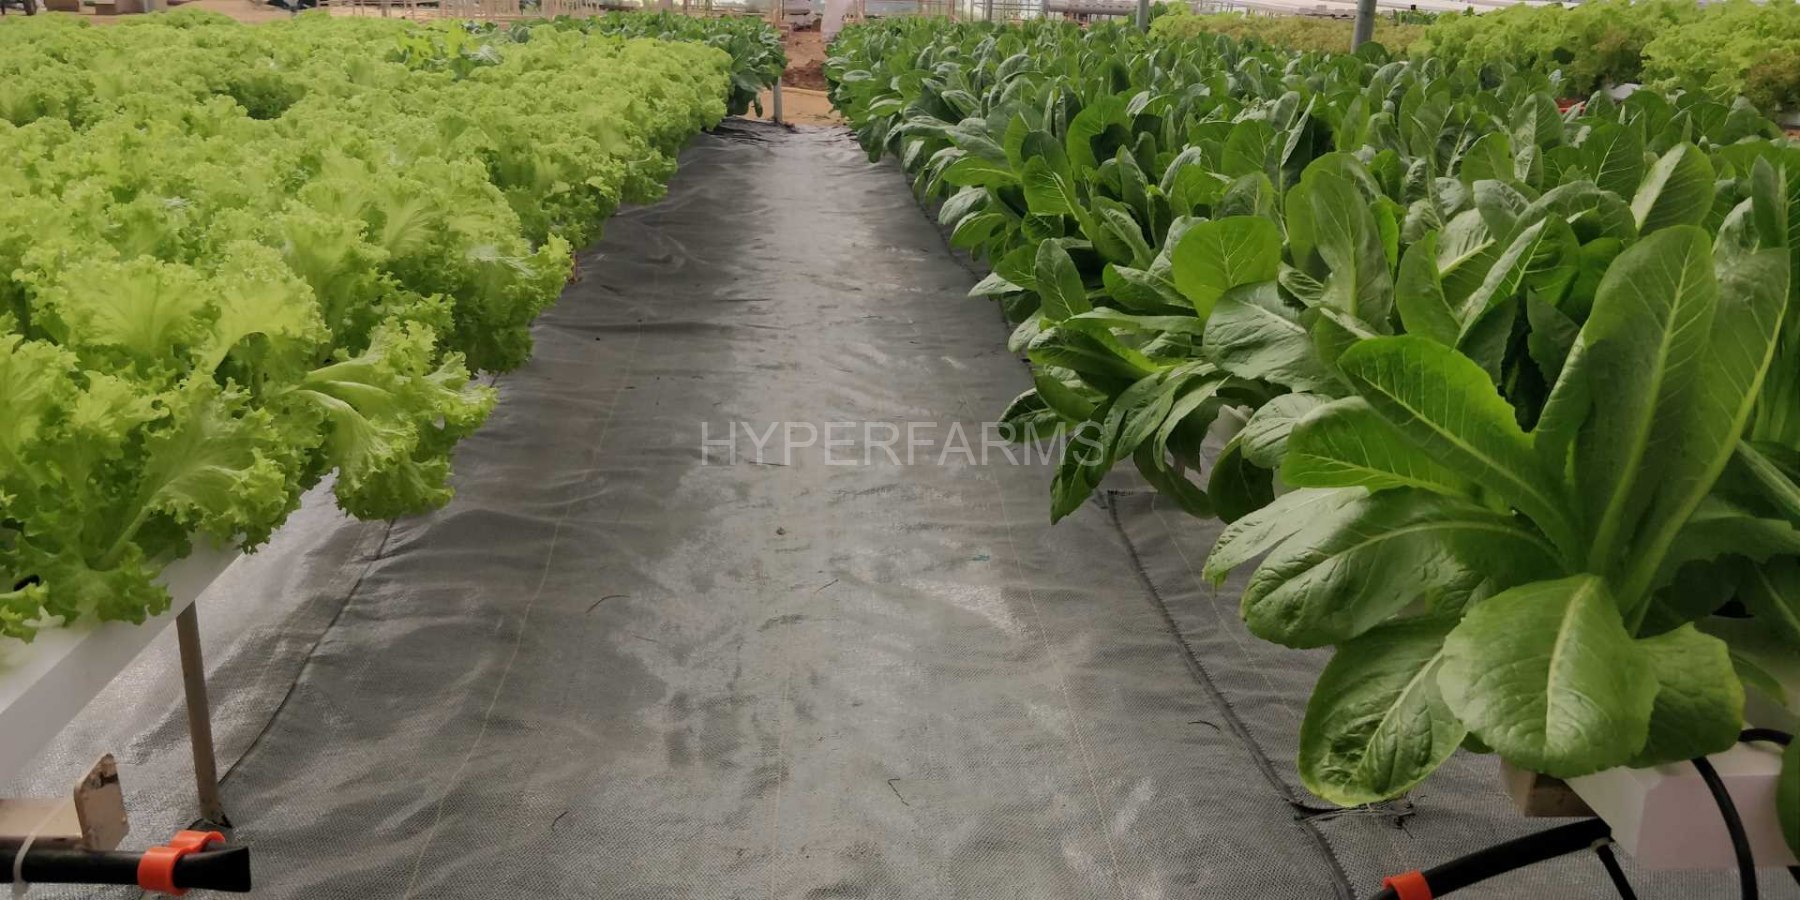 commercial-hydroponics-farming-india-hyperfarms-2-Large